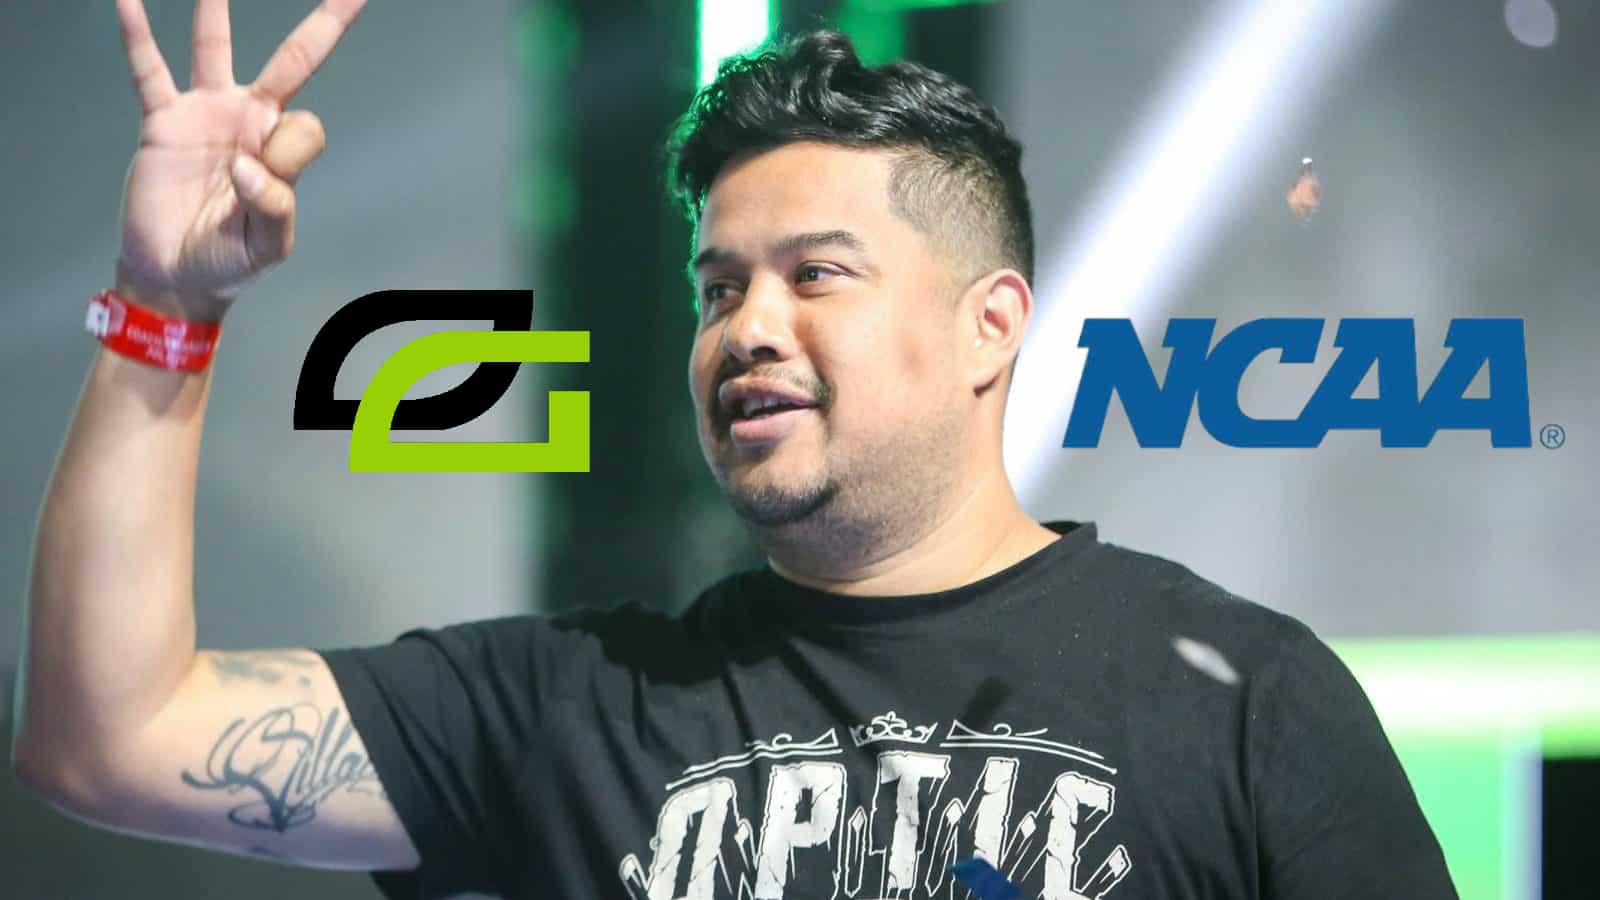 H3CZ teases adding college athletes to OpTic after NCAA rule change